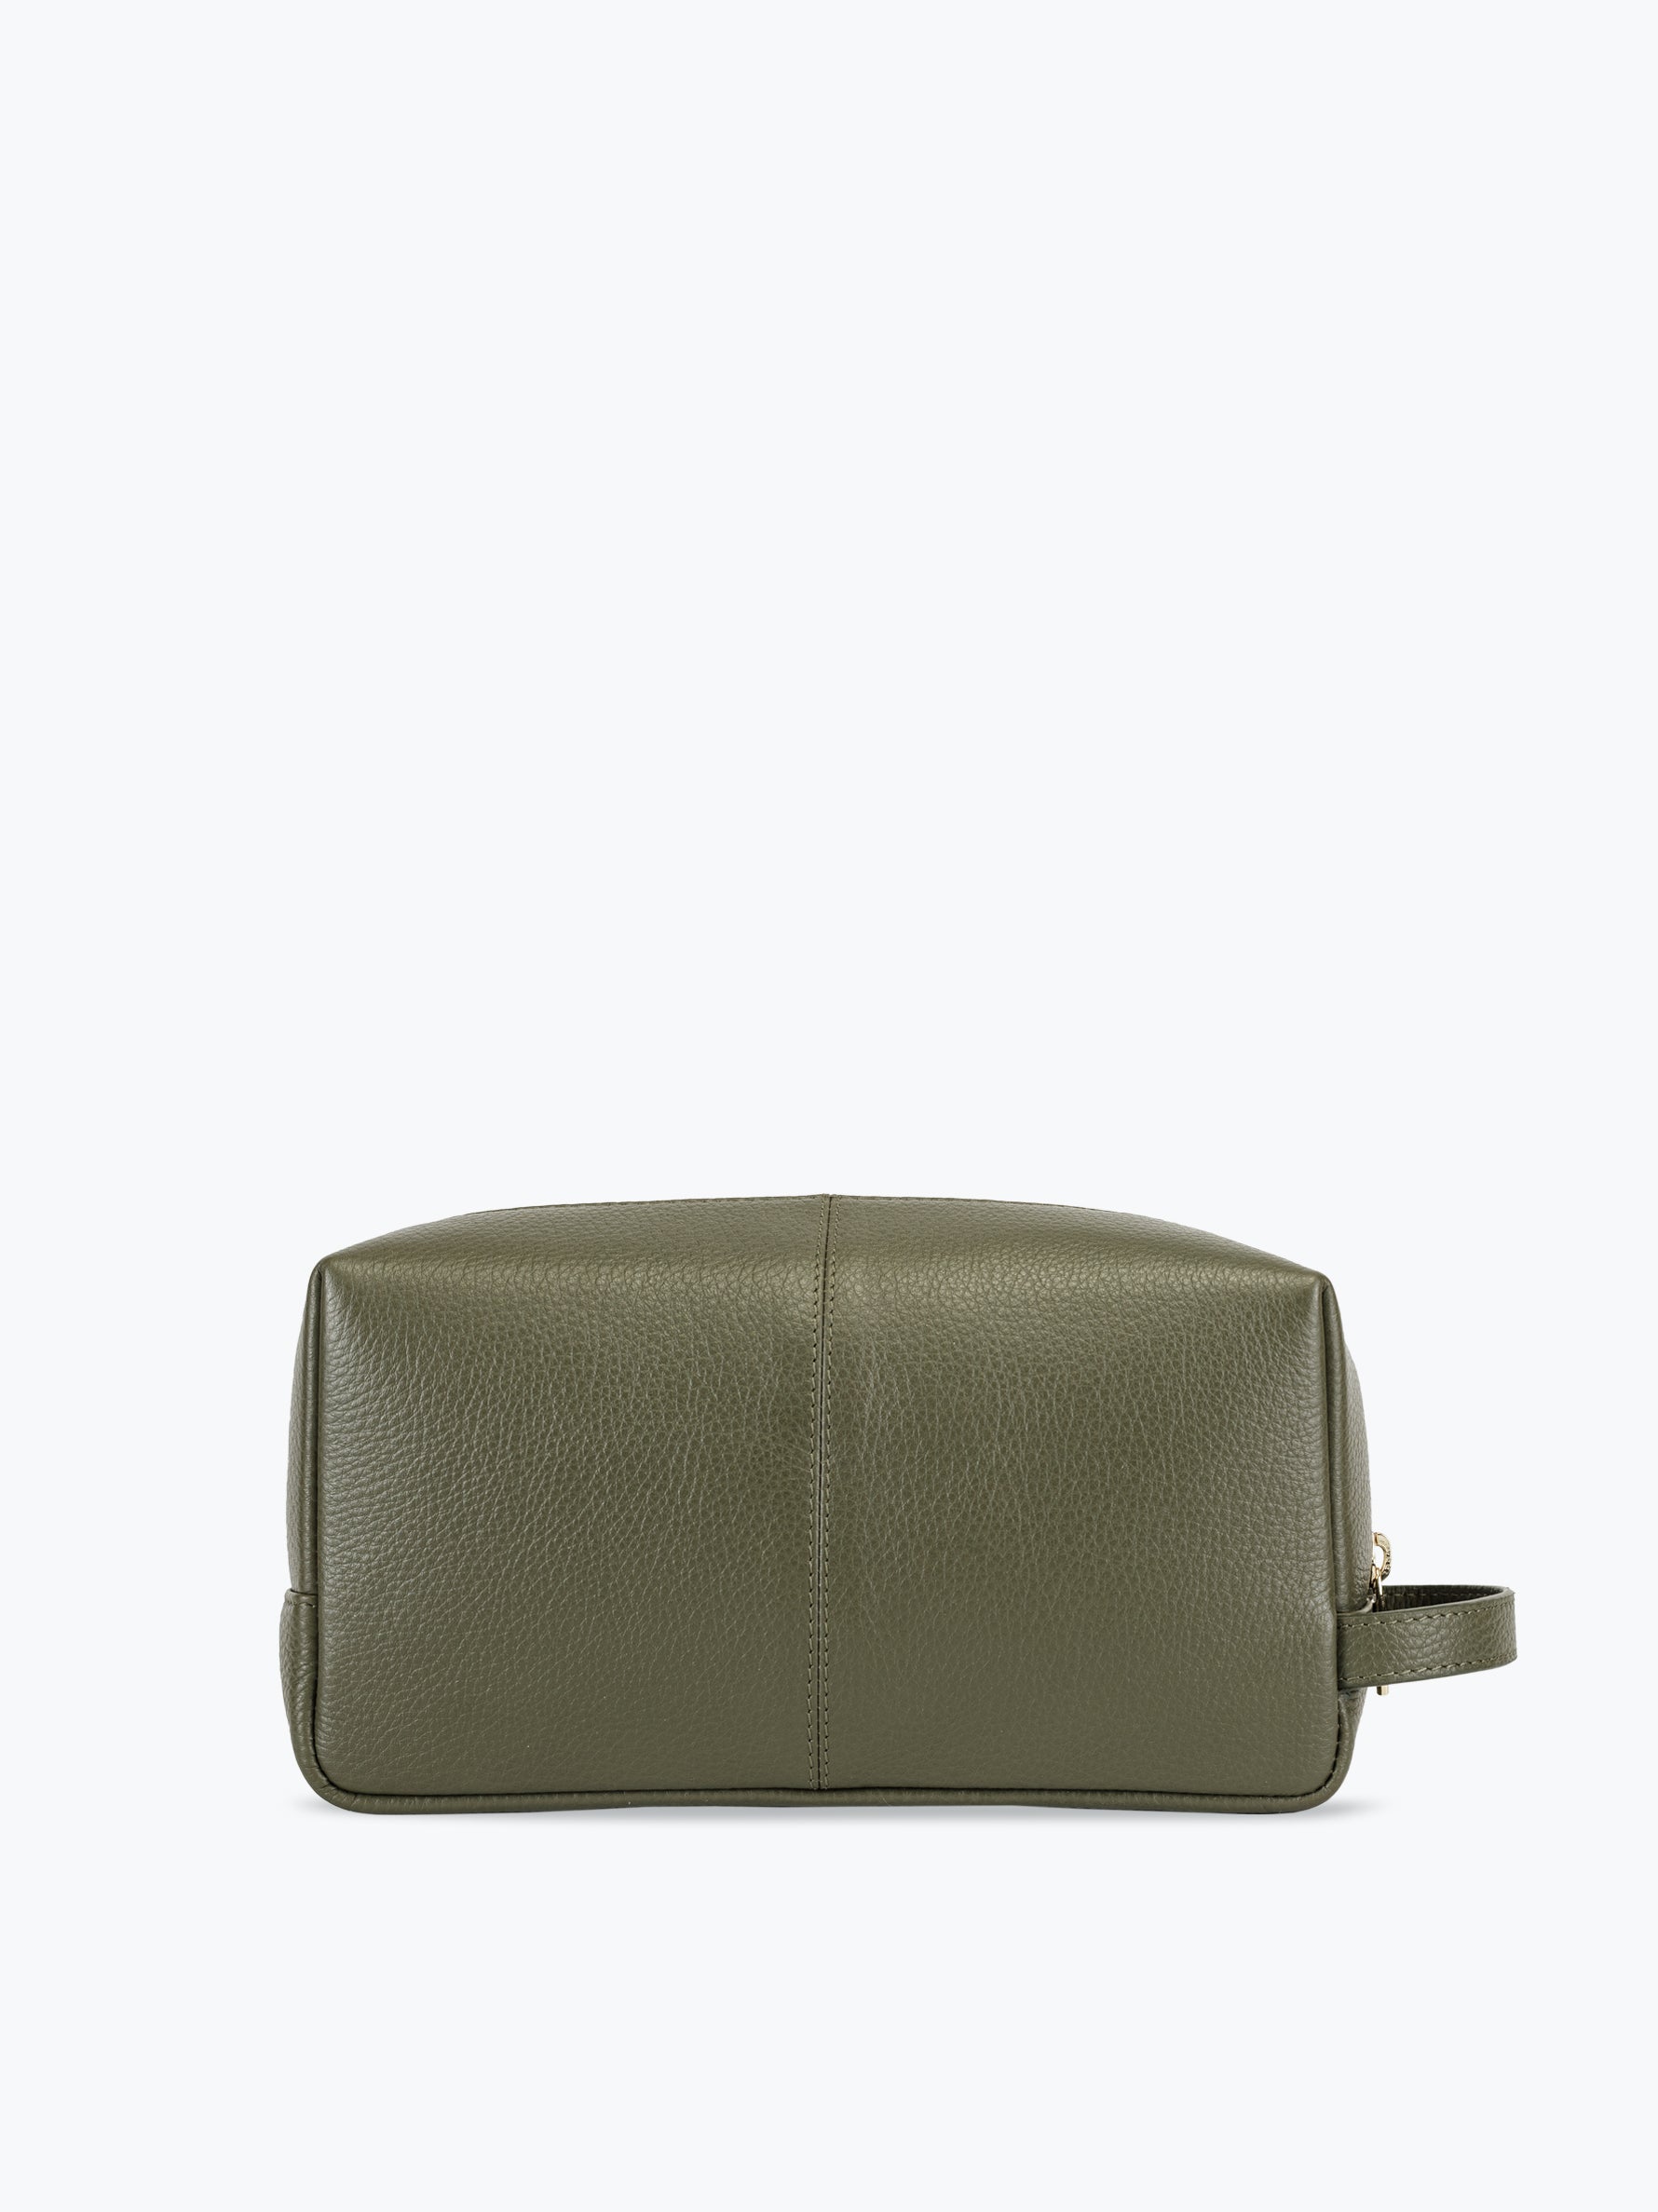 Handcrafted genuine leather classic washbag for women Olive Green